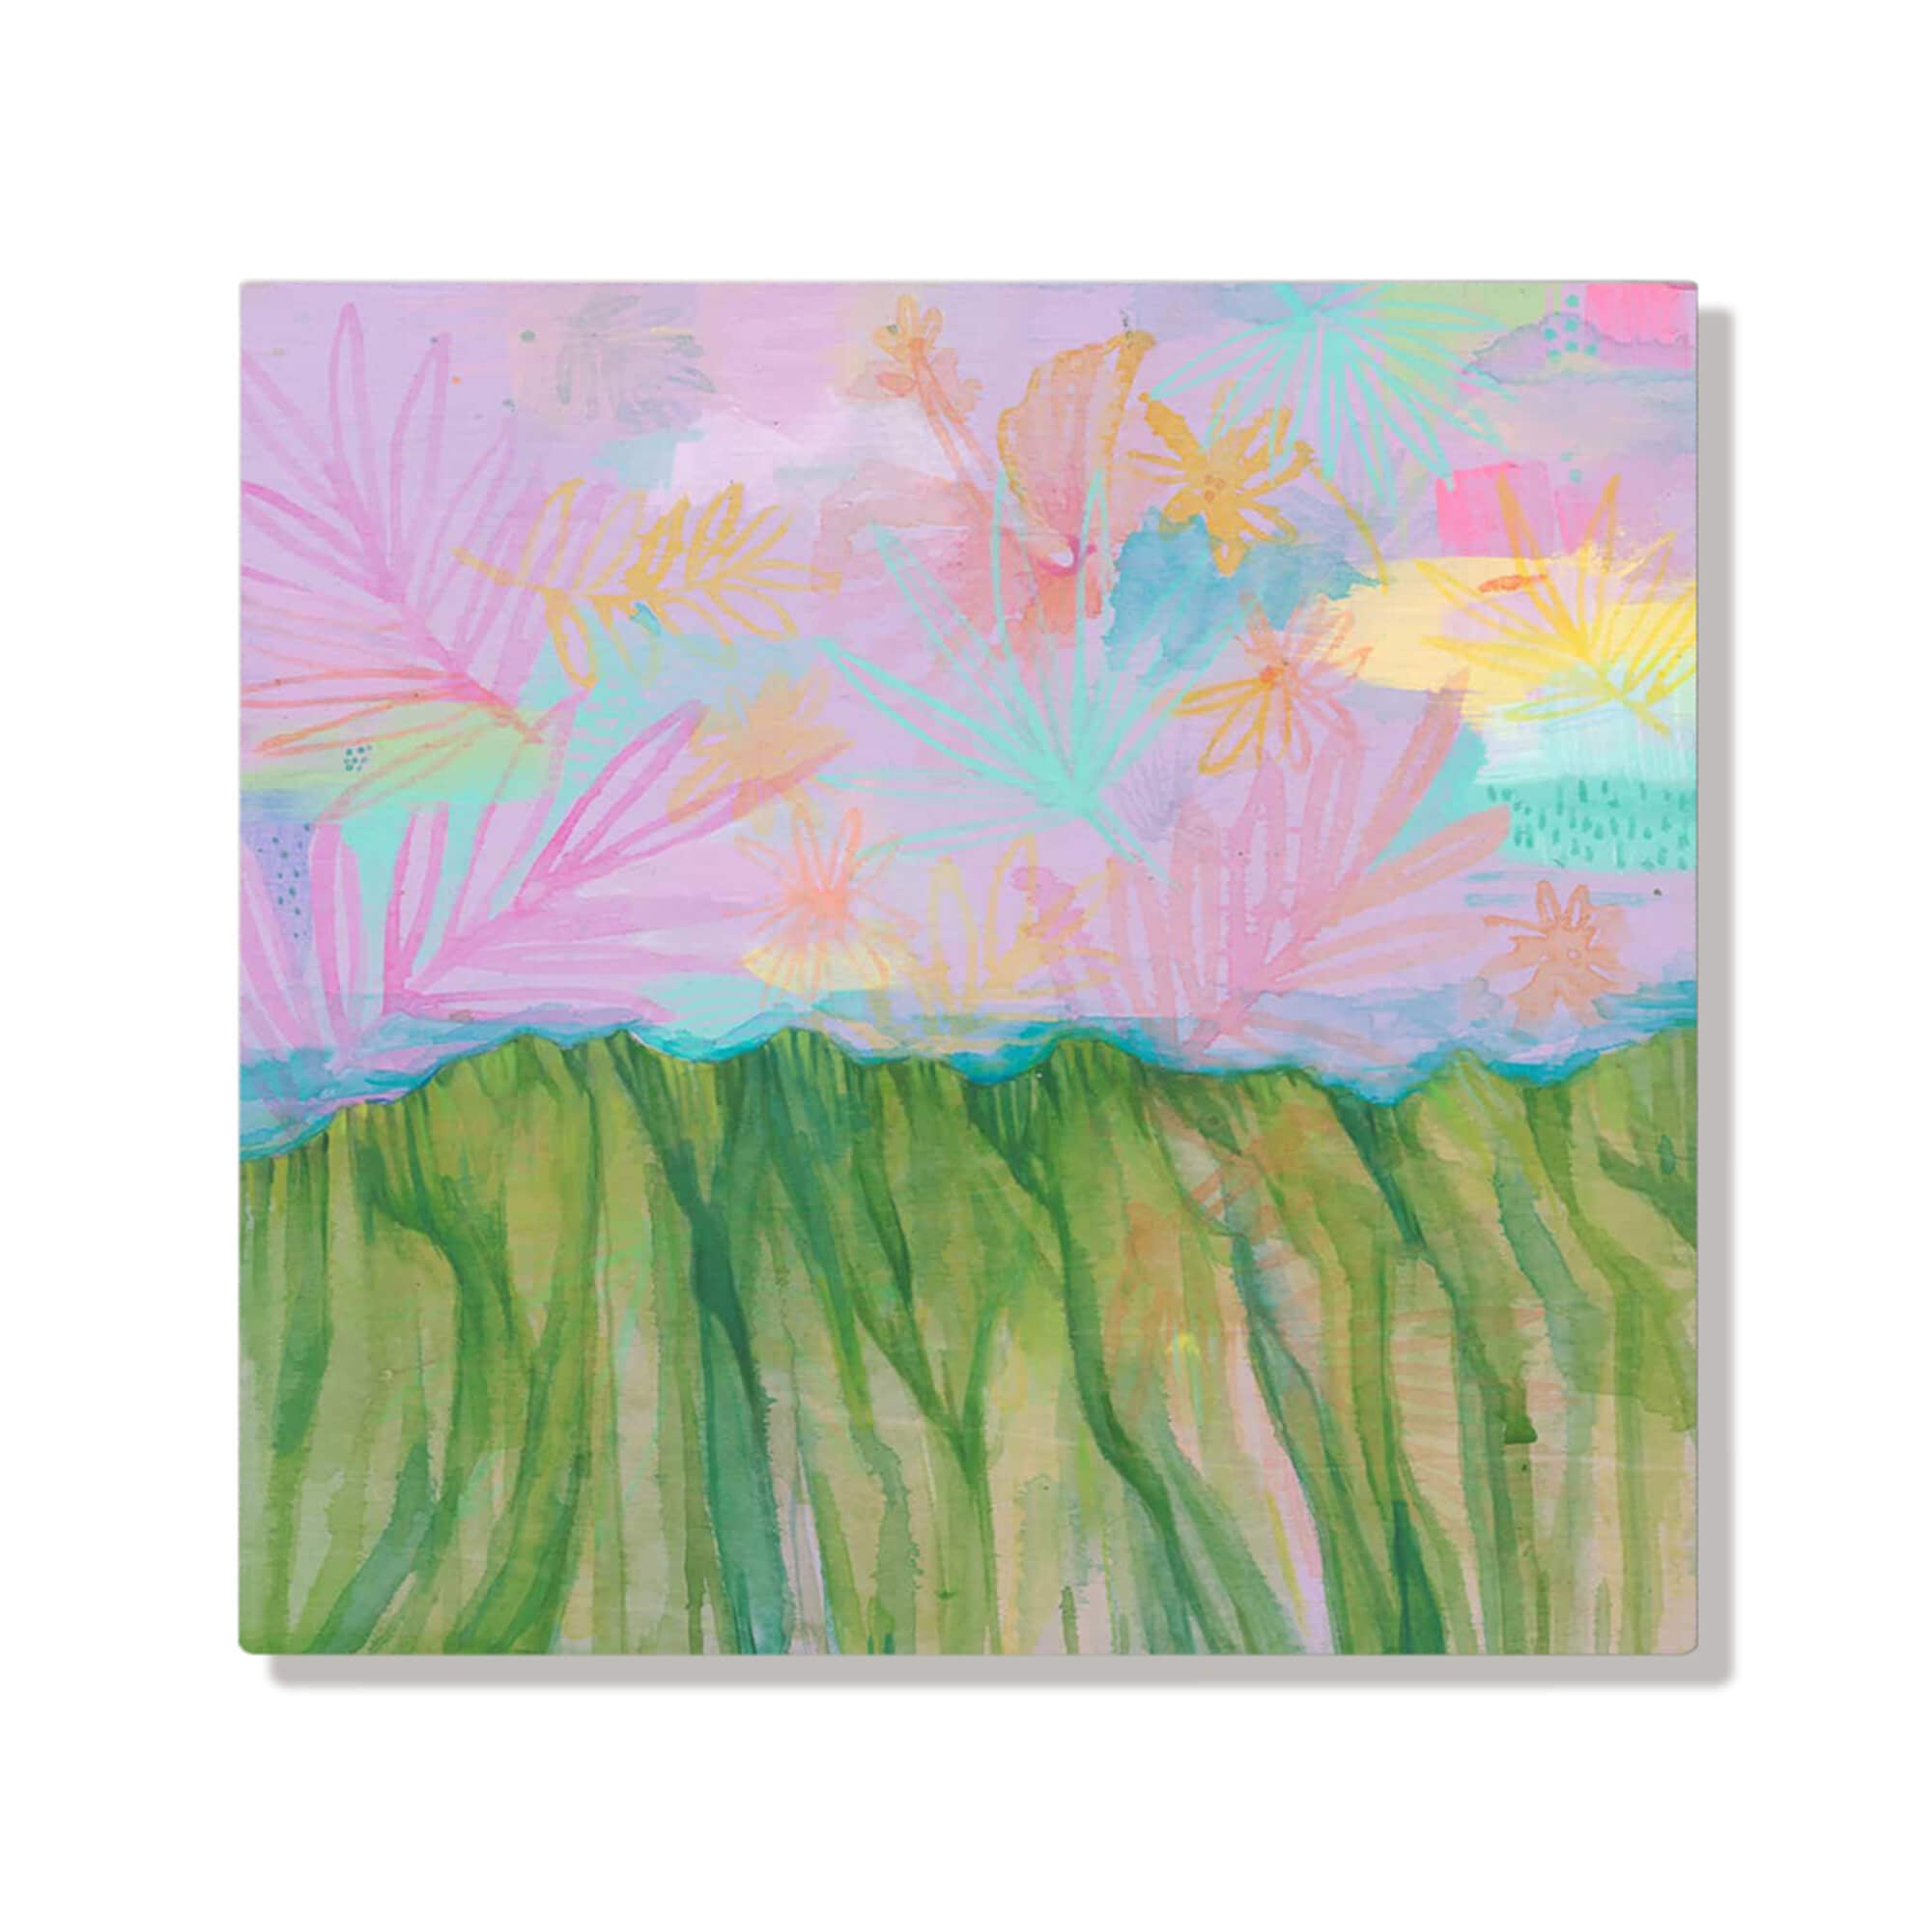 A metal art print of a multi-hued sky with traces of tropical flora over the Koolau mountains by Hawaii artist Lauren Roth